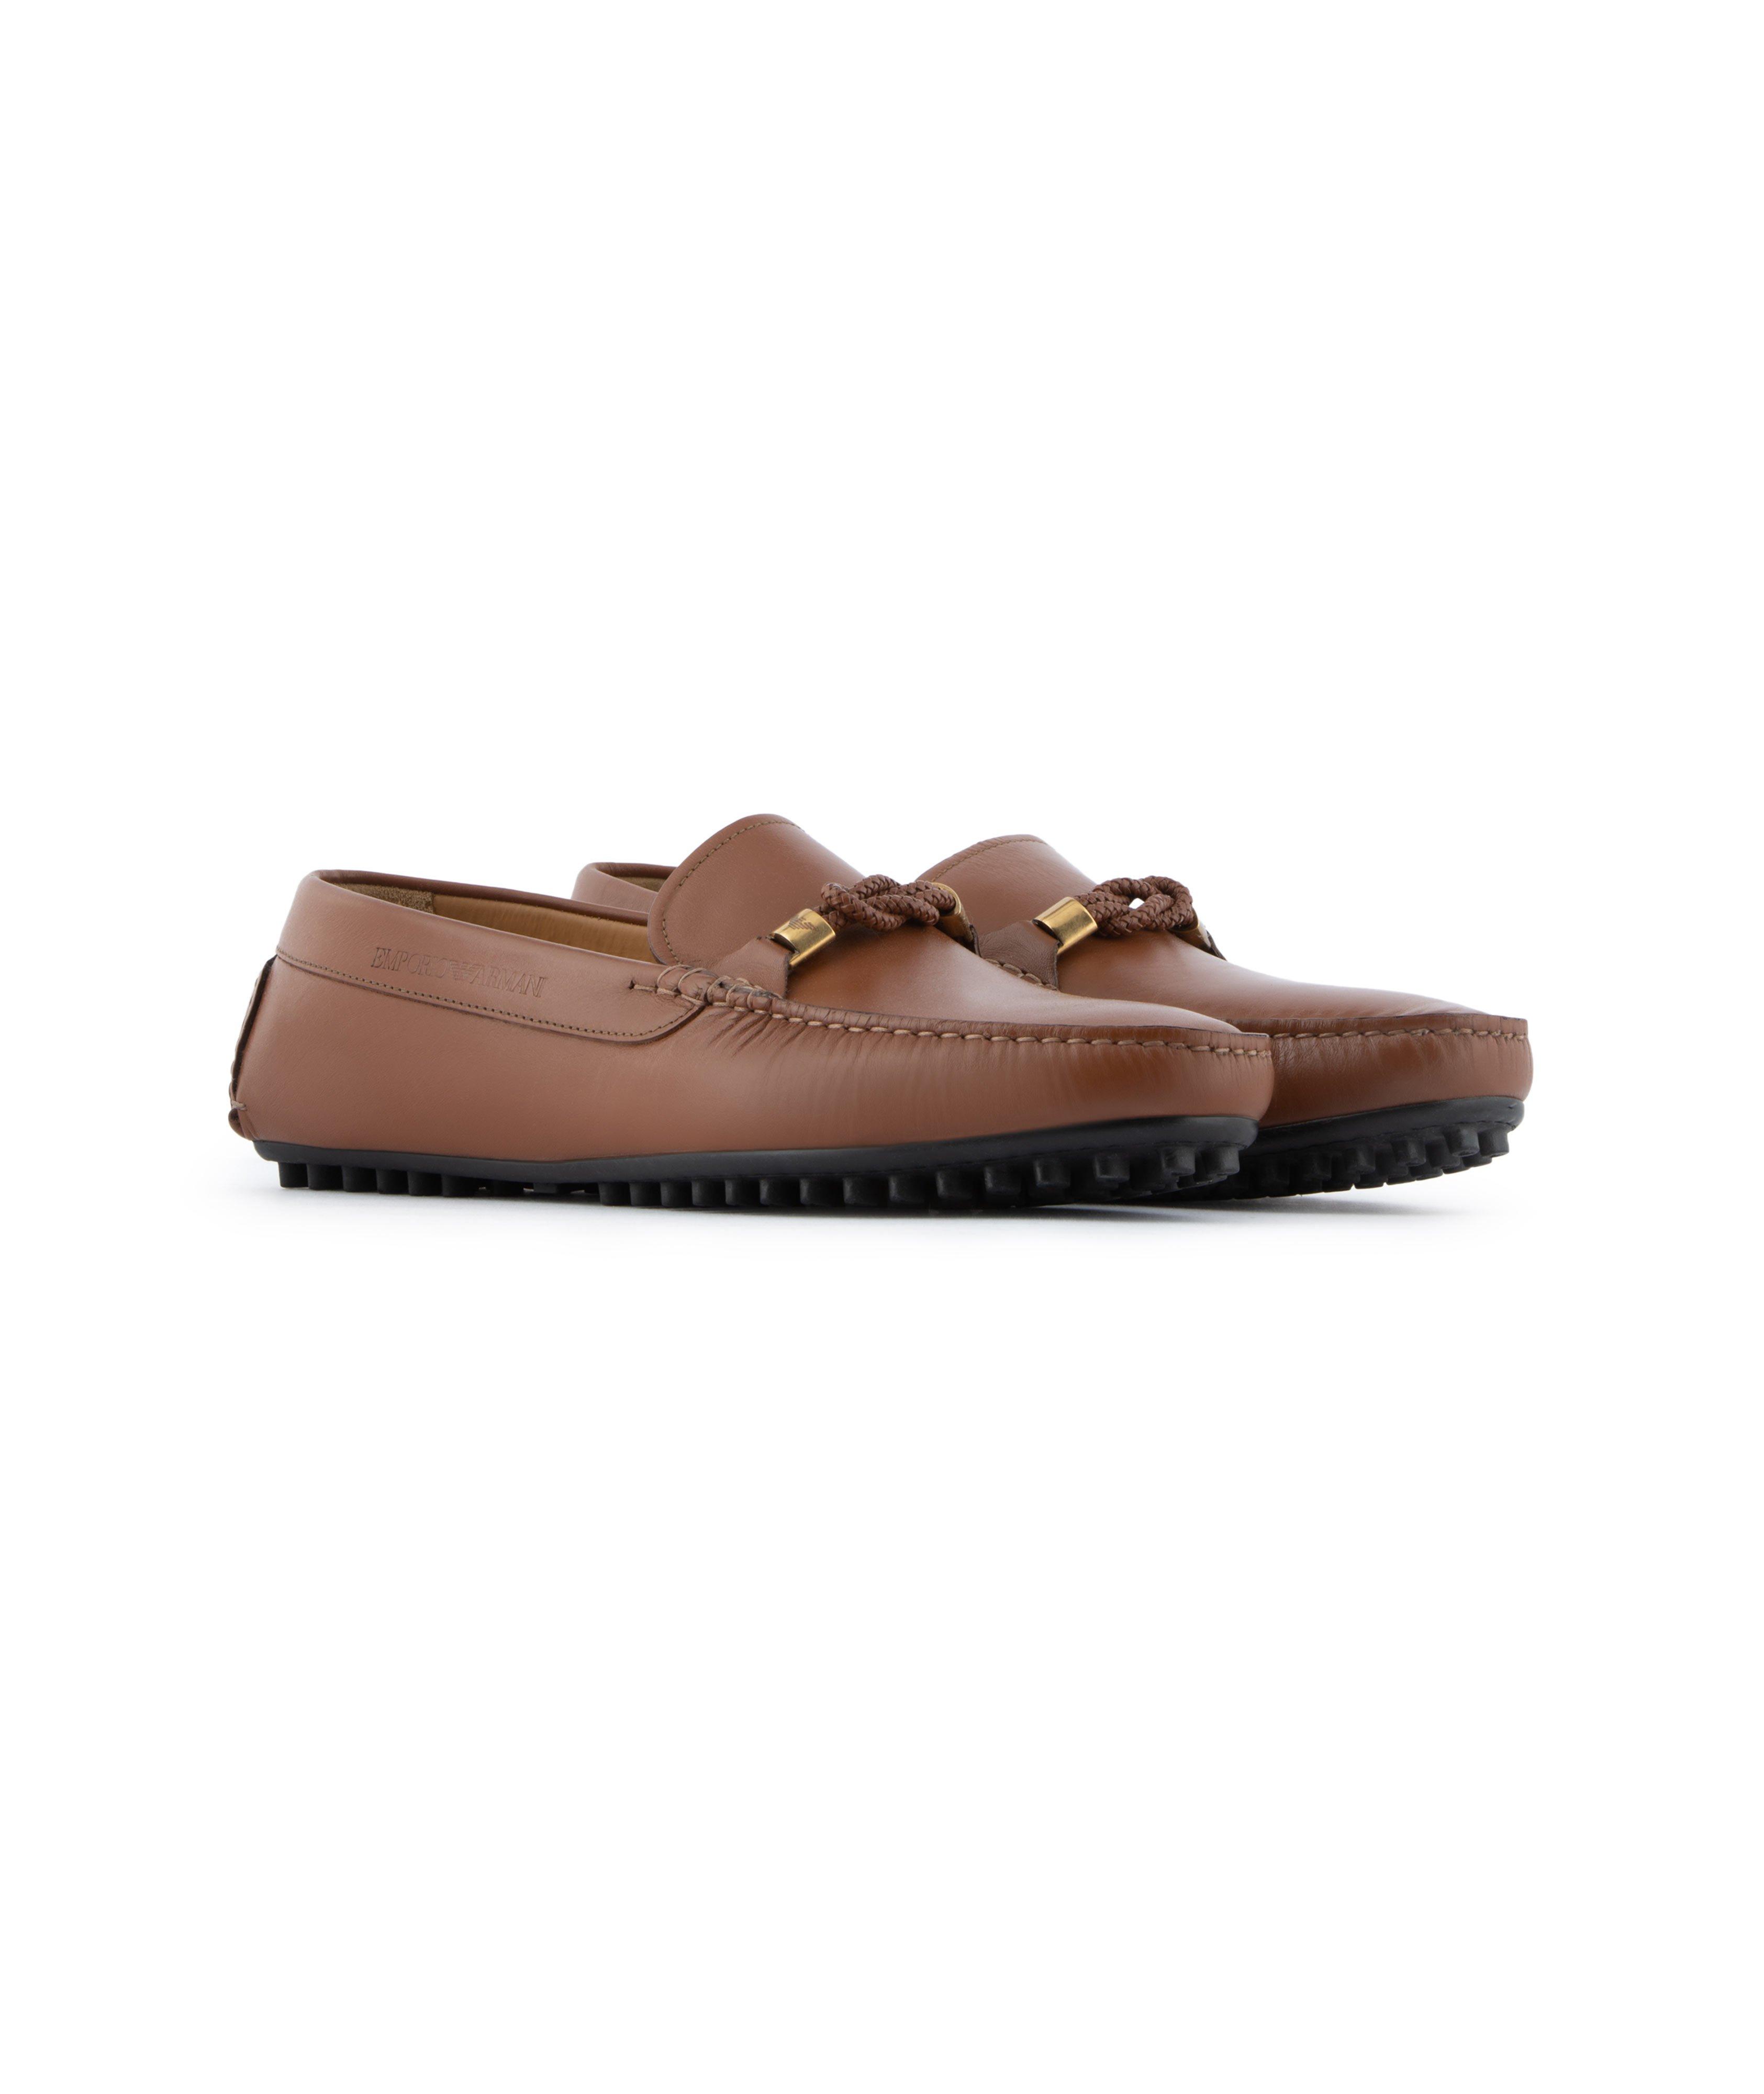 Leather Driving Loafer image 0